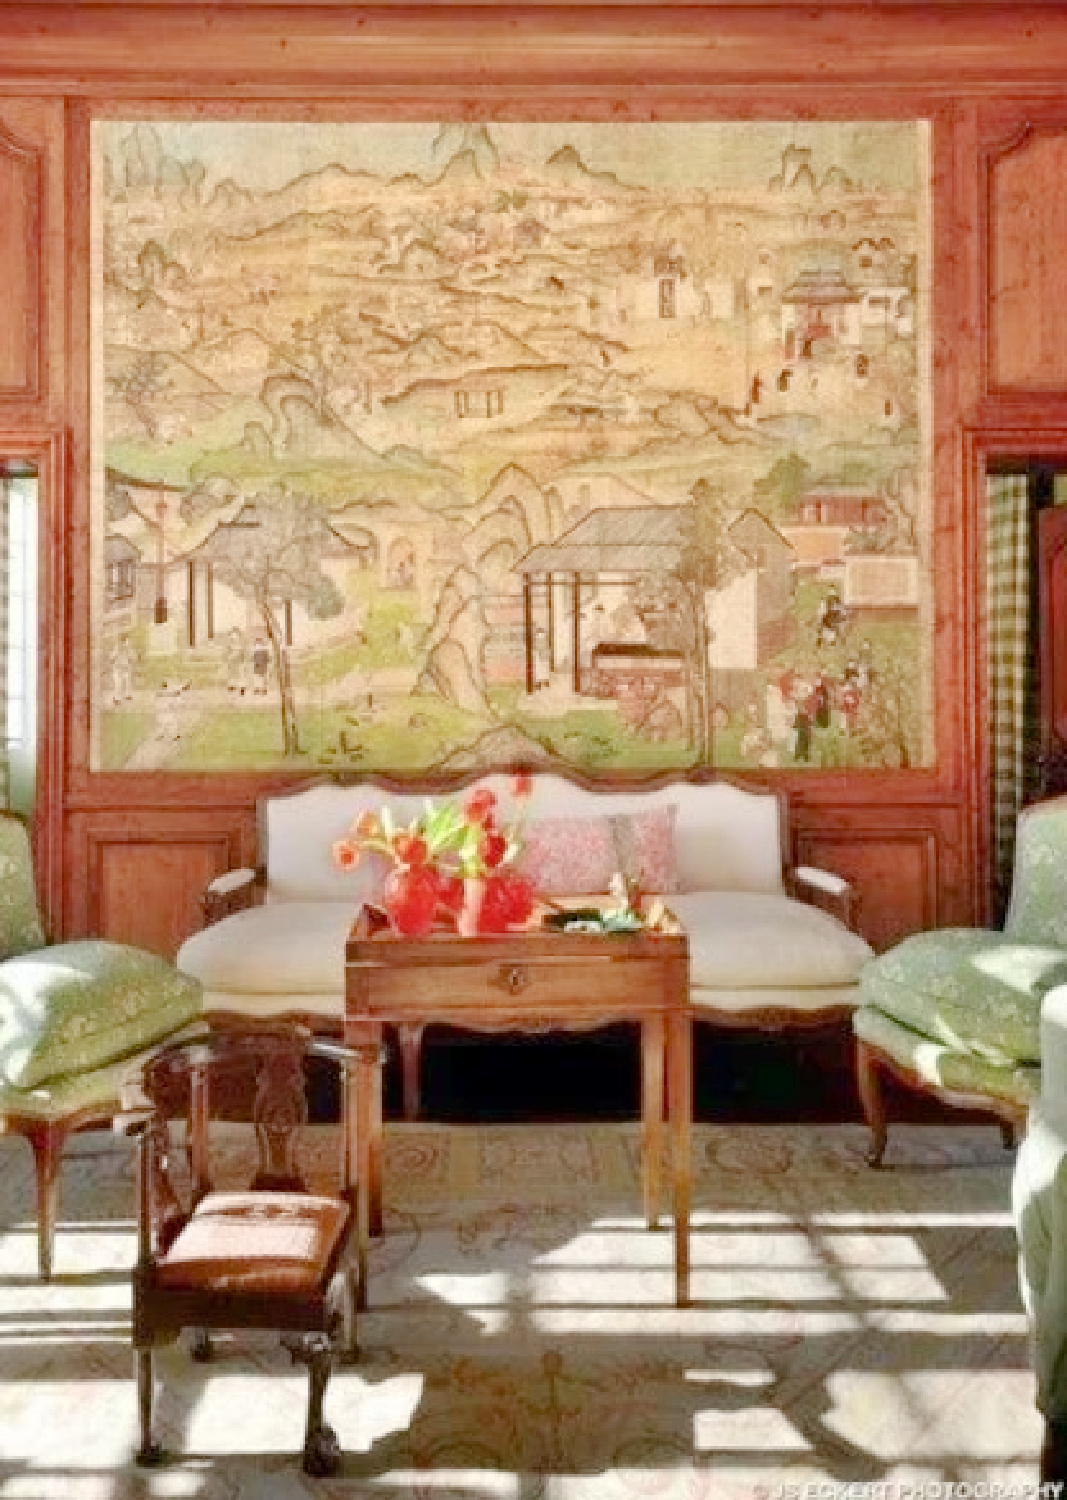 Chinese mural in beautiful French country 1920s estate. David Adler La Lanterne Mansion is a 1922 historic home in Lake Bluff with French inspired architecture and interiors.